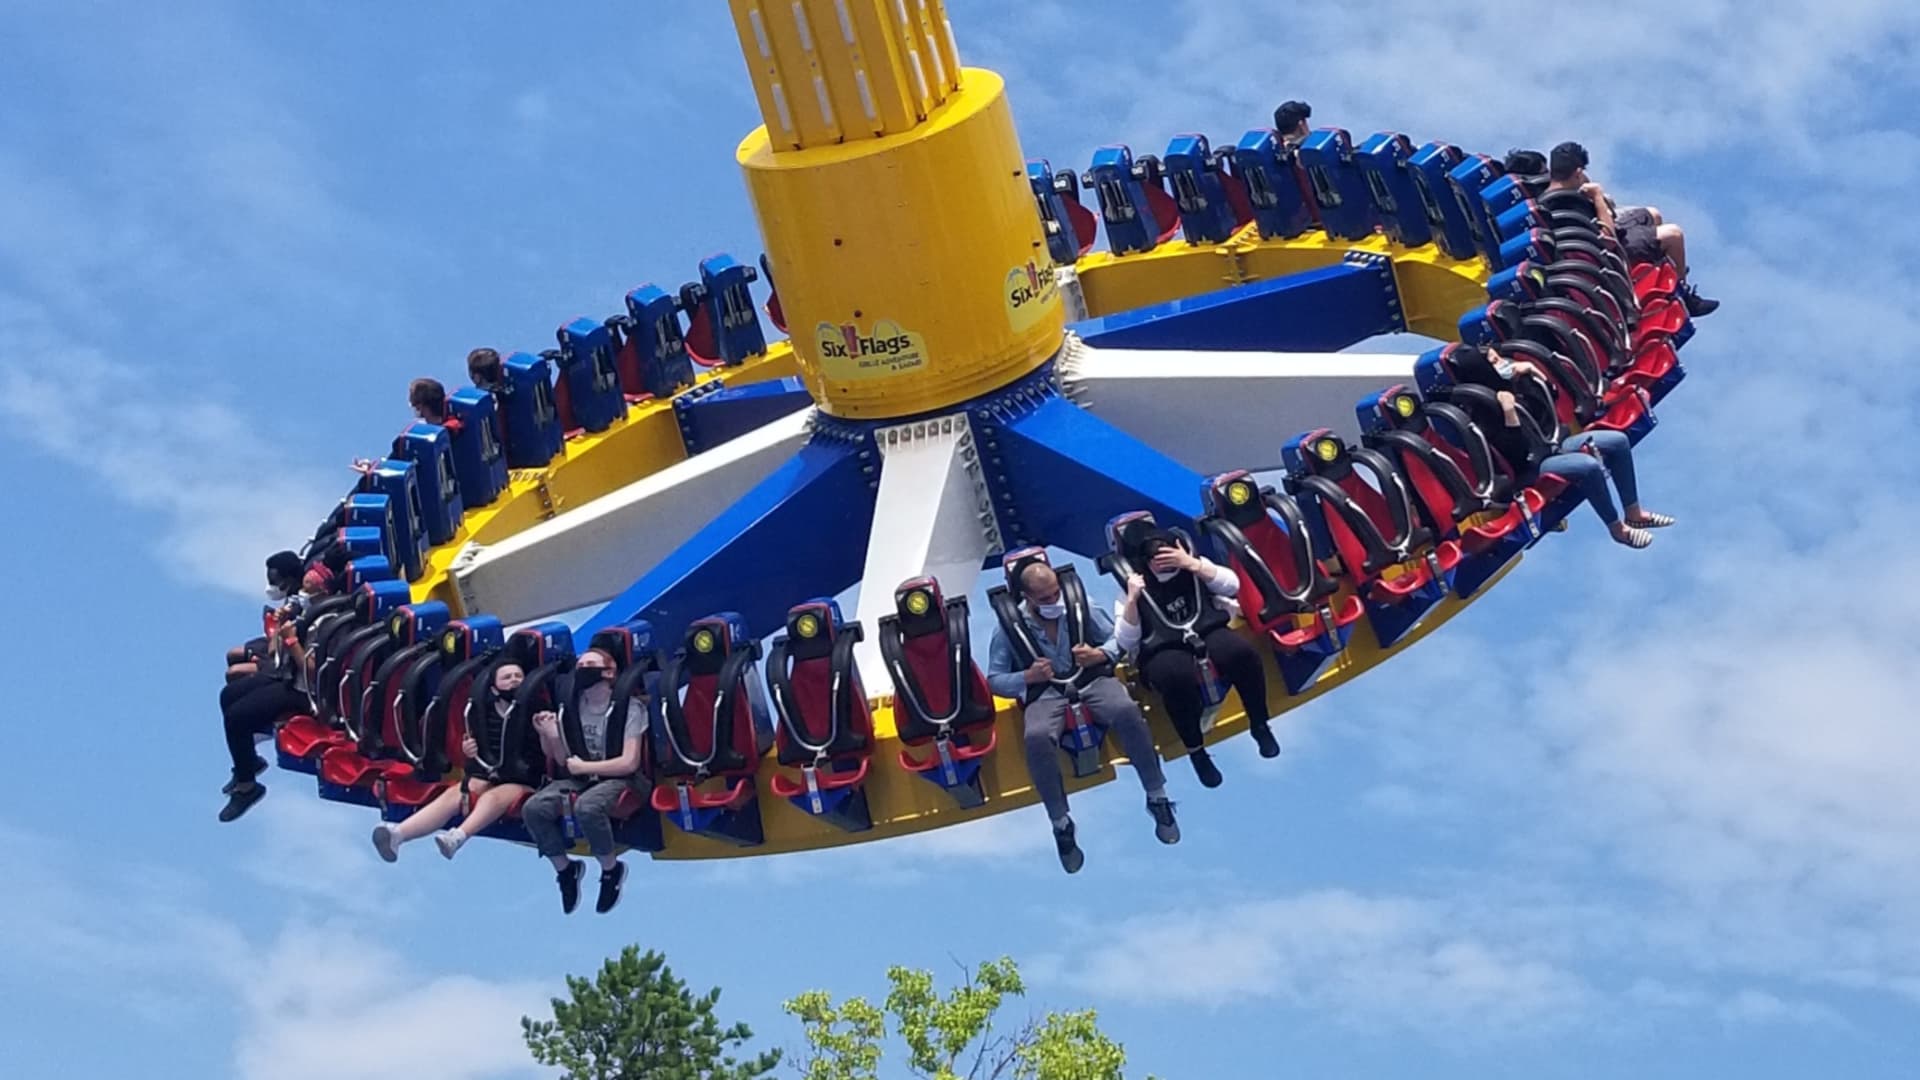 Trip Report: Six Flags America offers a decent, yet dated coaster collection